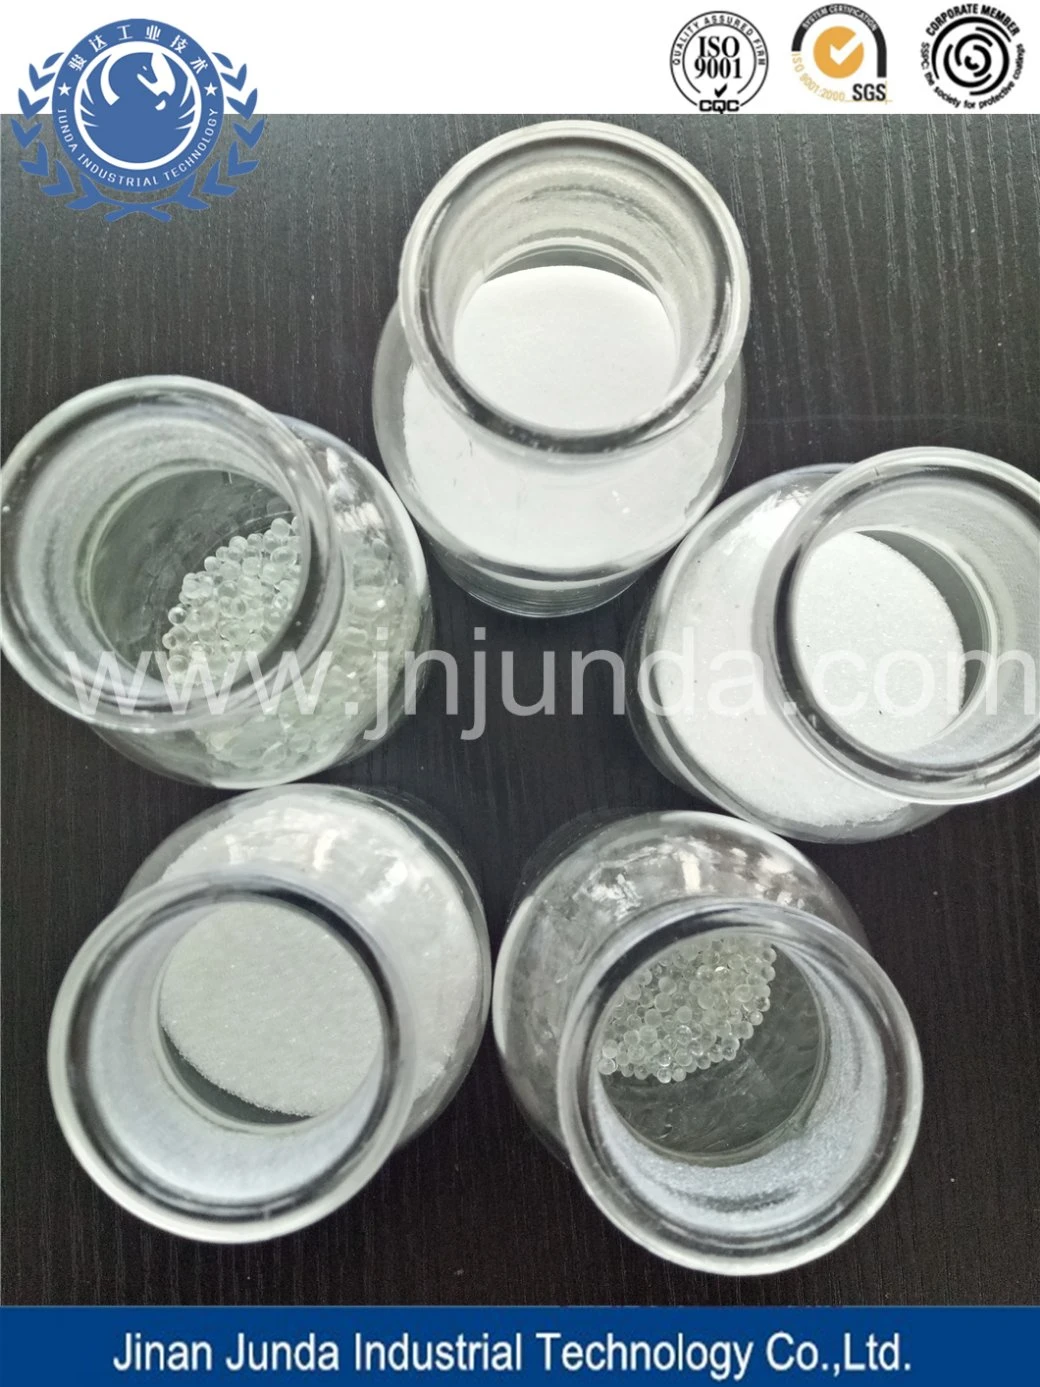 Glass Beads for Road Marking/Sandblasting Glass Beads and Glass Microspheres - Professional Manufacturer